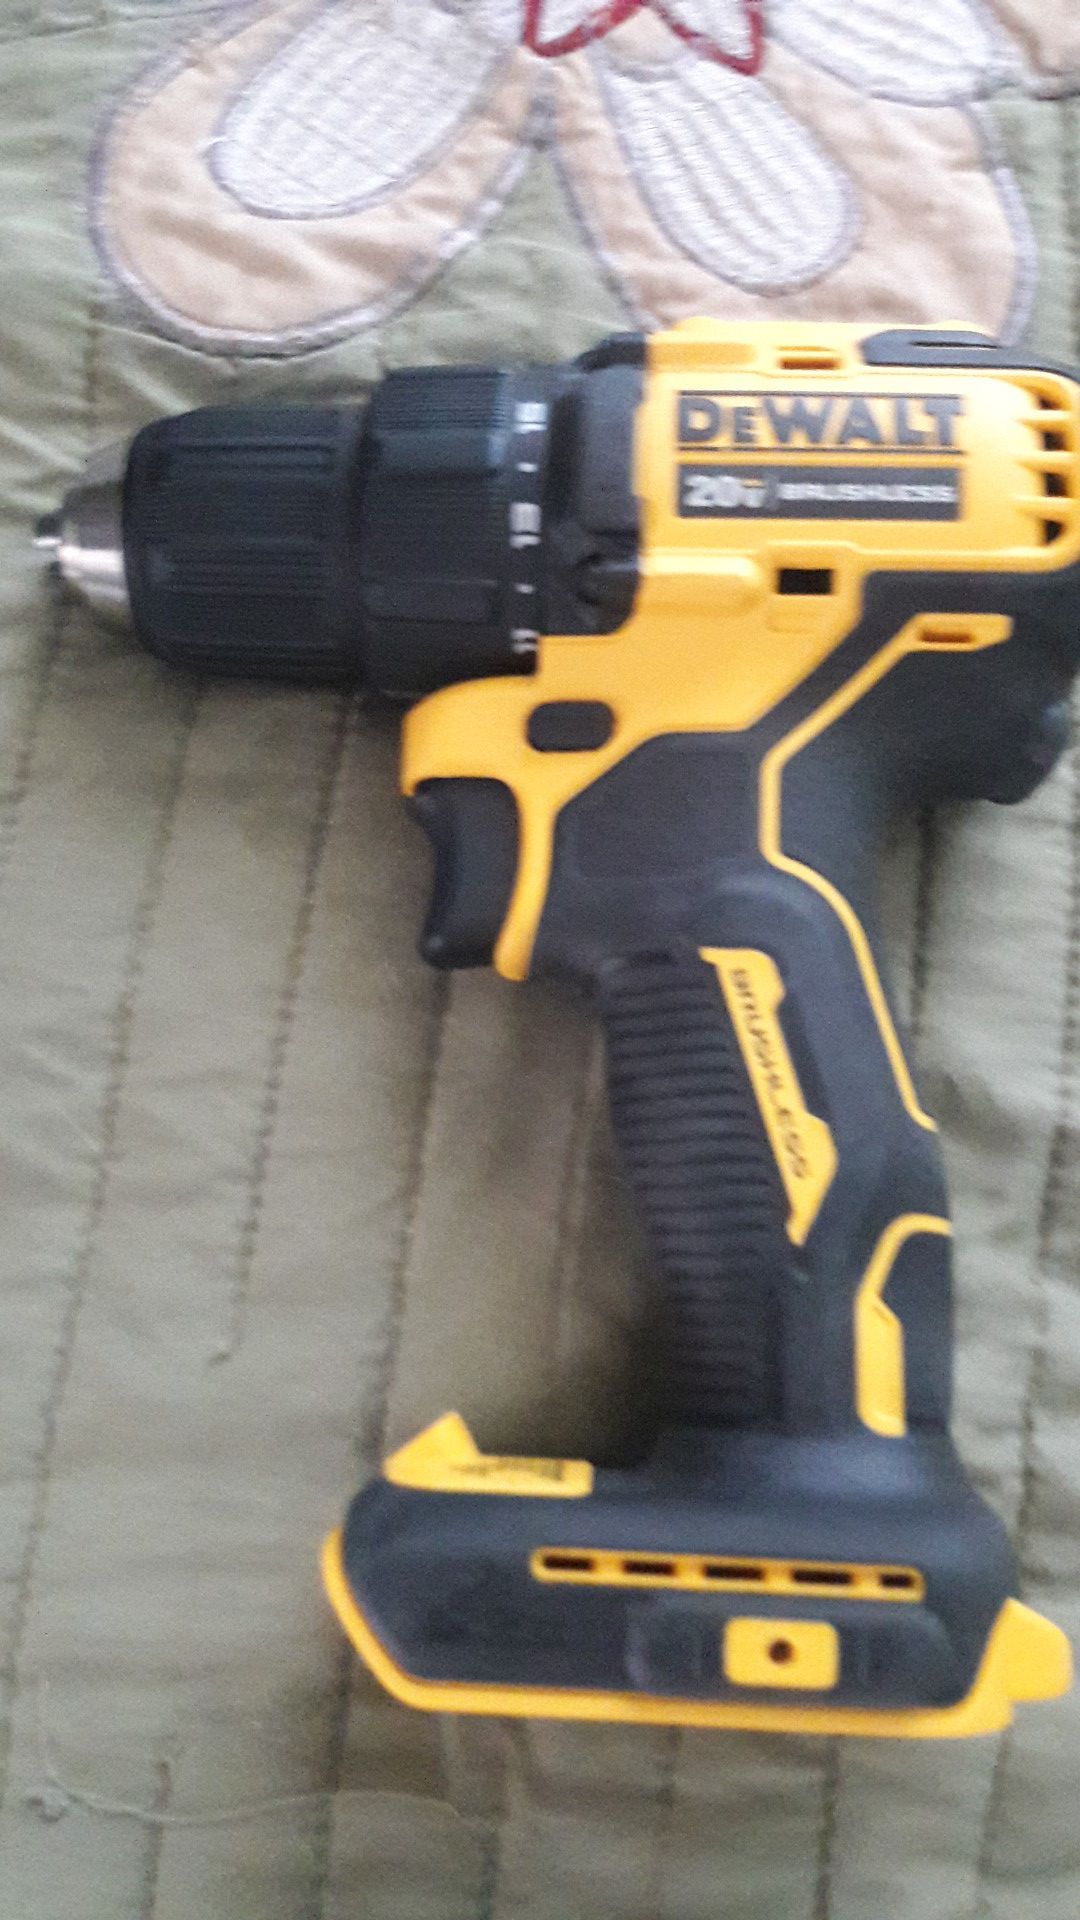 New DeWalt Atomic brushless drill tool only